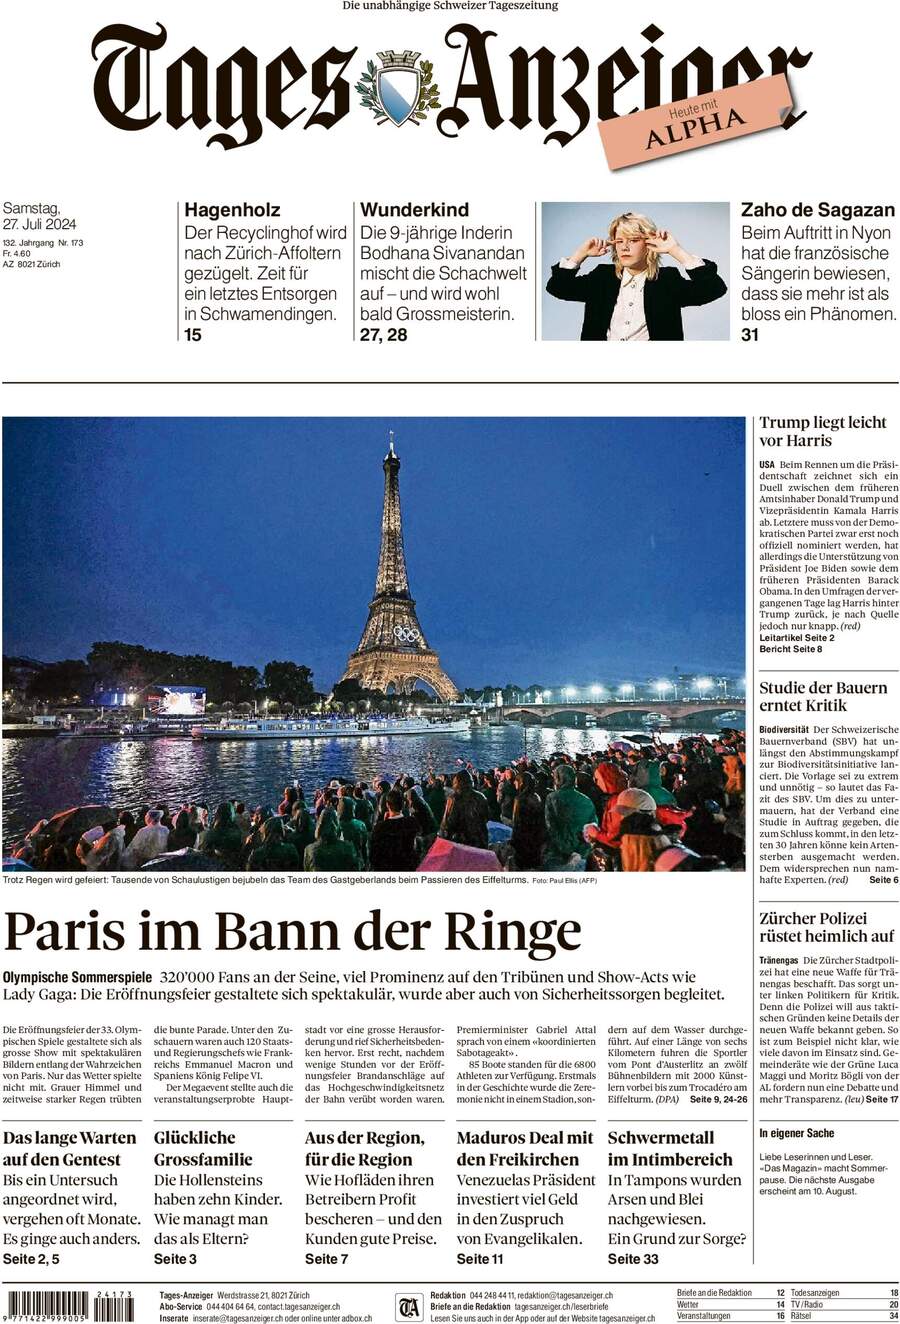 Tages-Anzeiger (Tagi TA) - Front Page - 07/28/2024